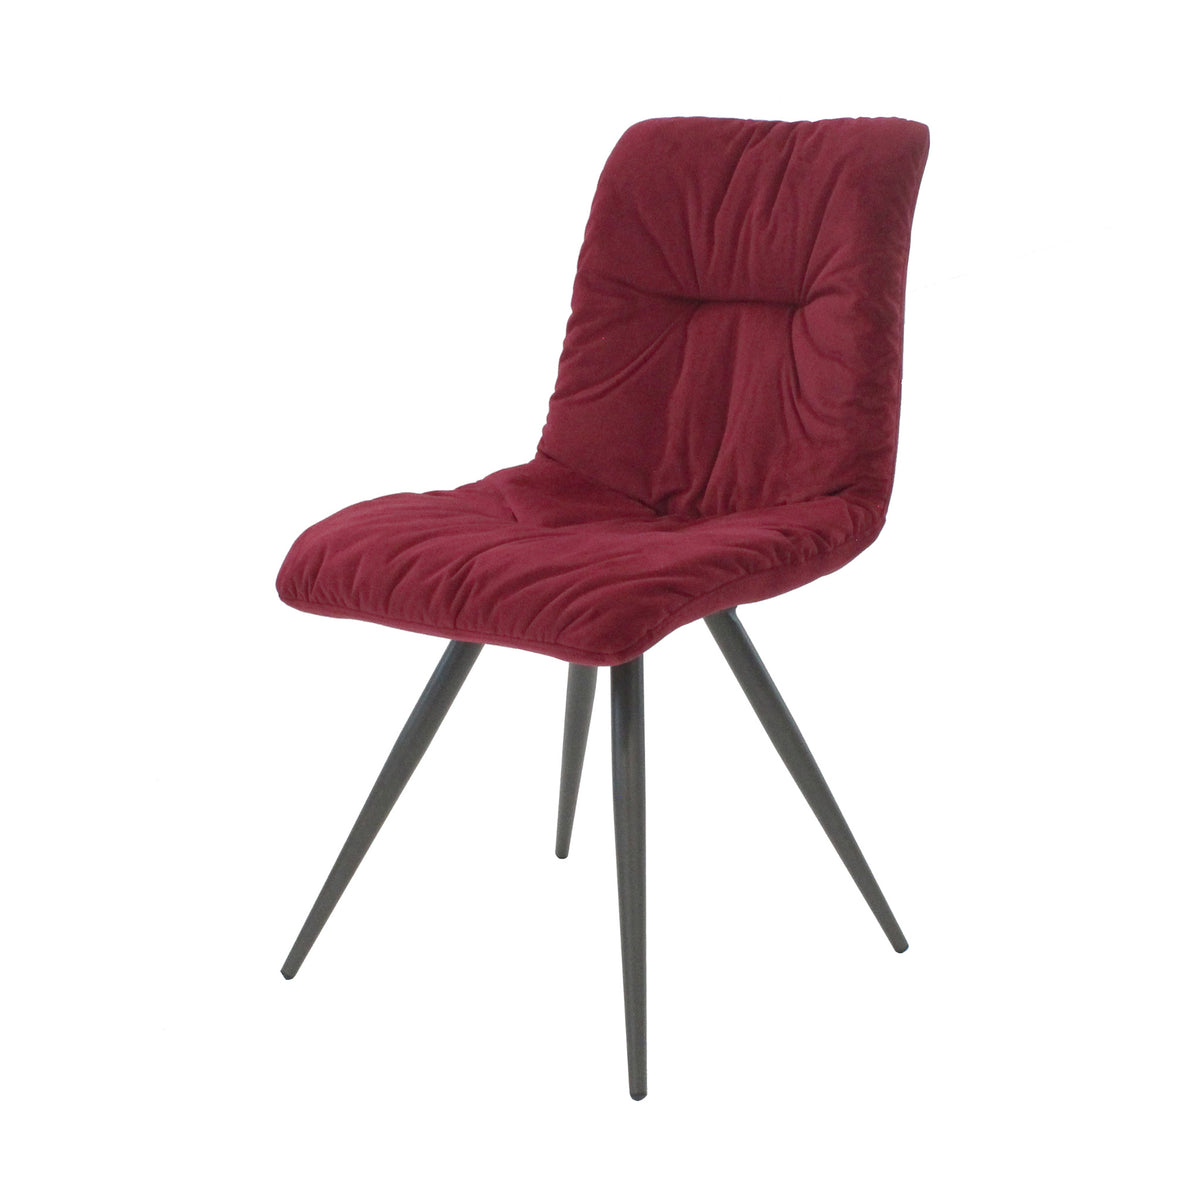 Addison Red Chair